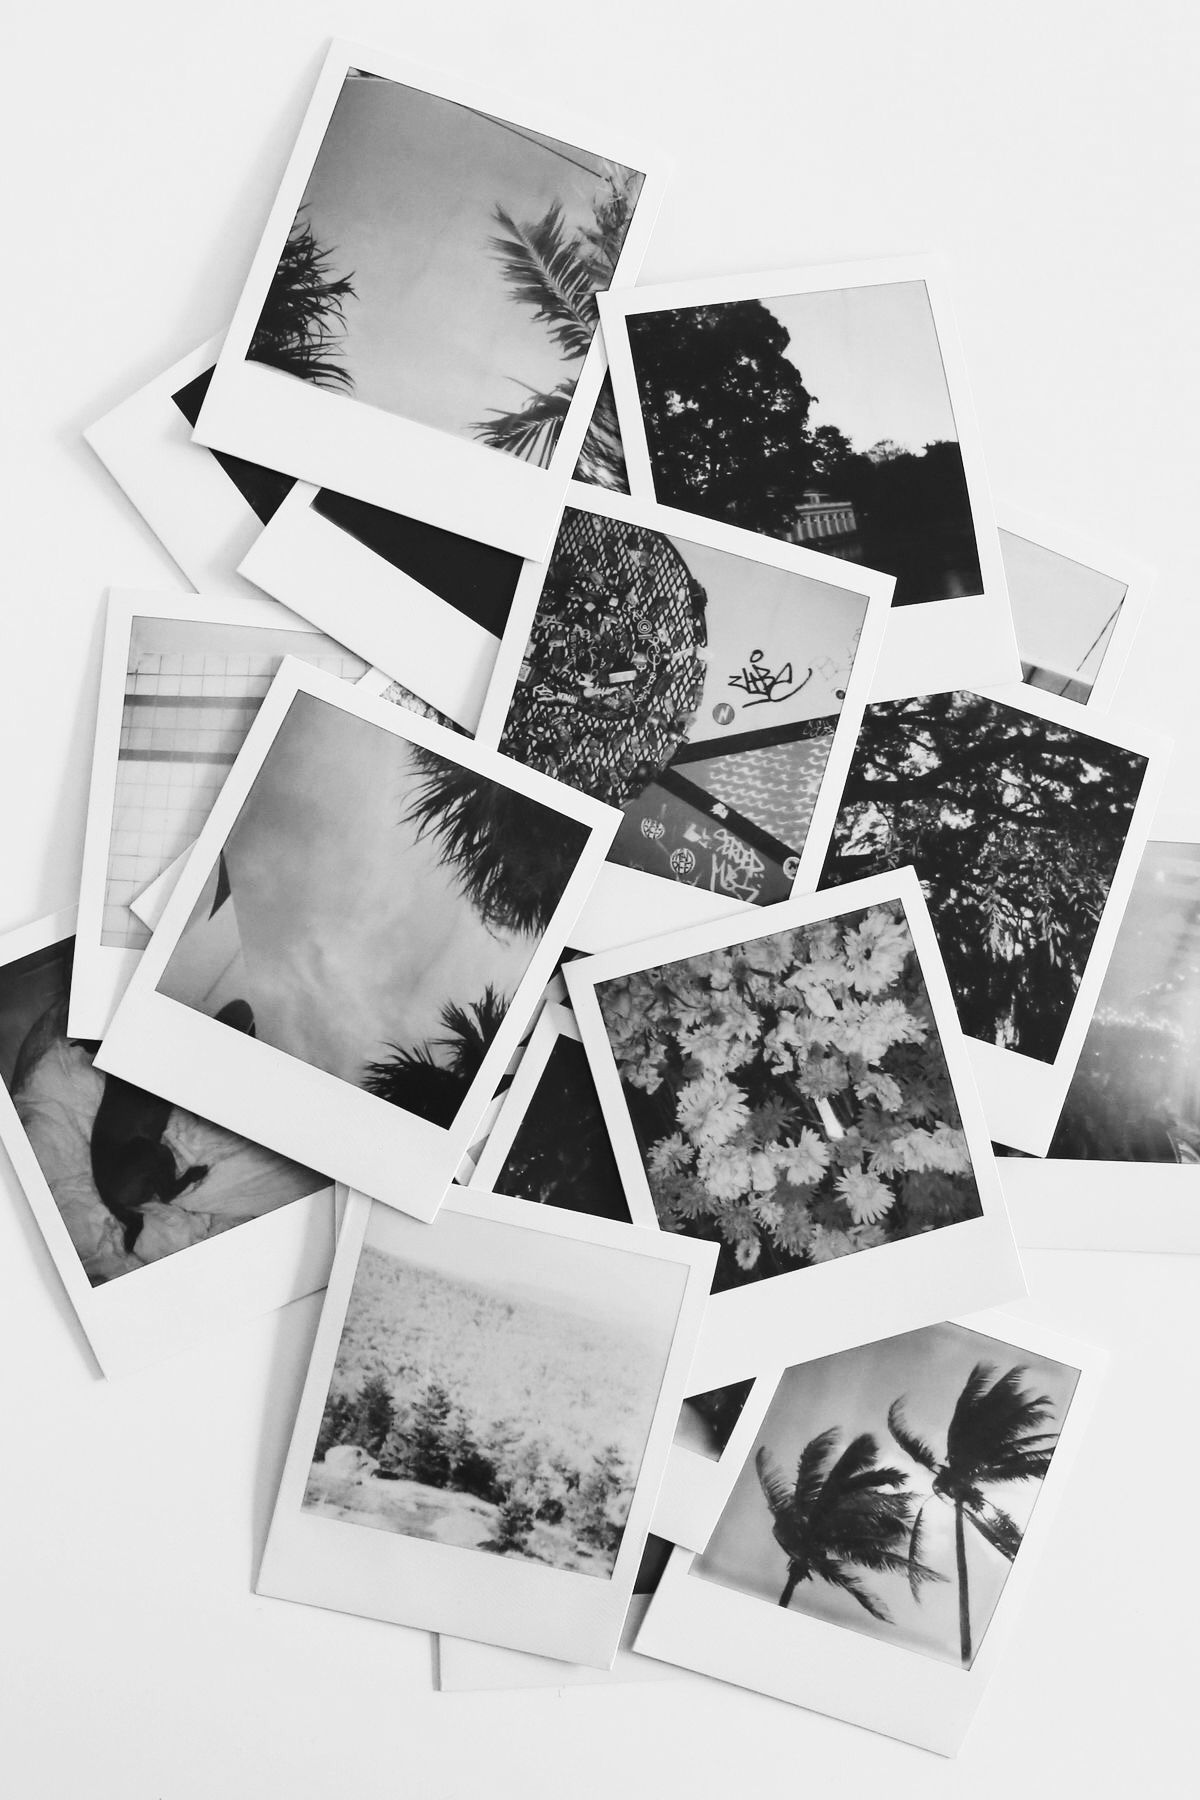 A bunch of polaroids are scattered on the table - Polaroid